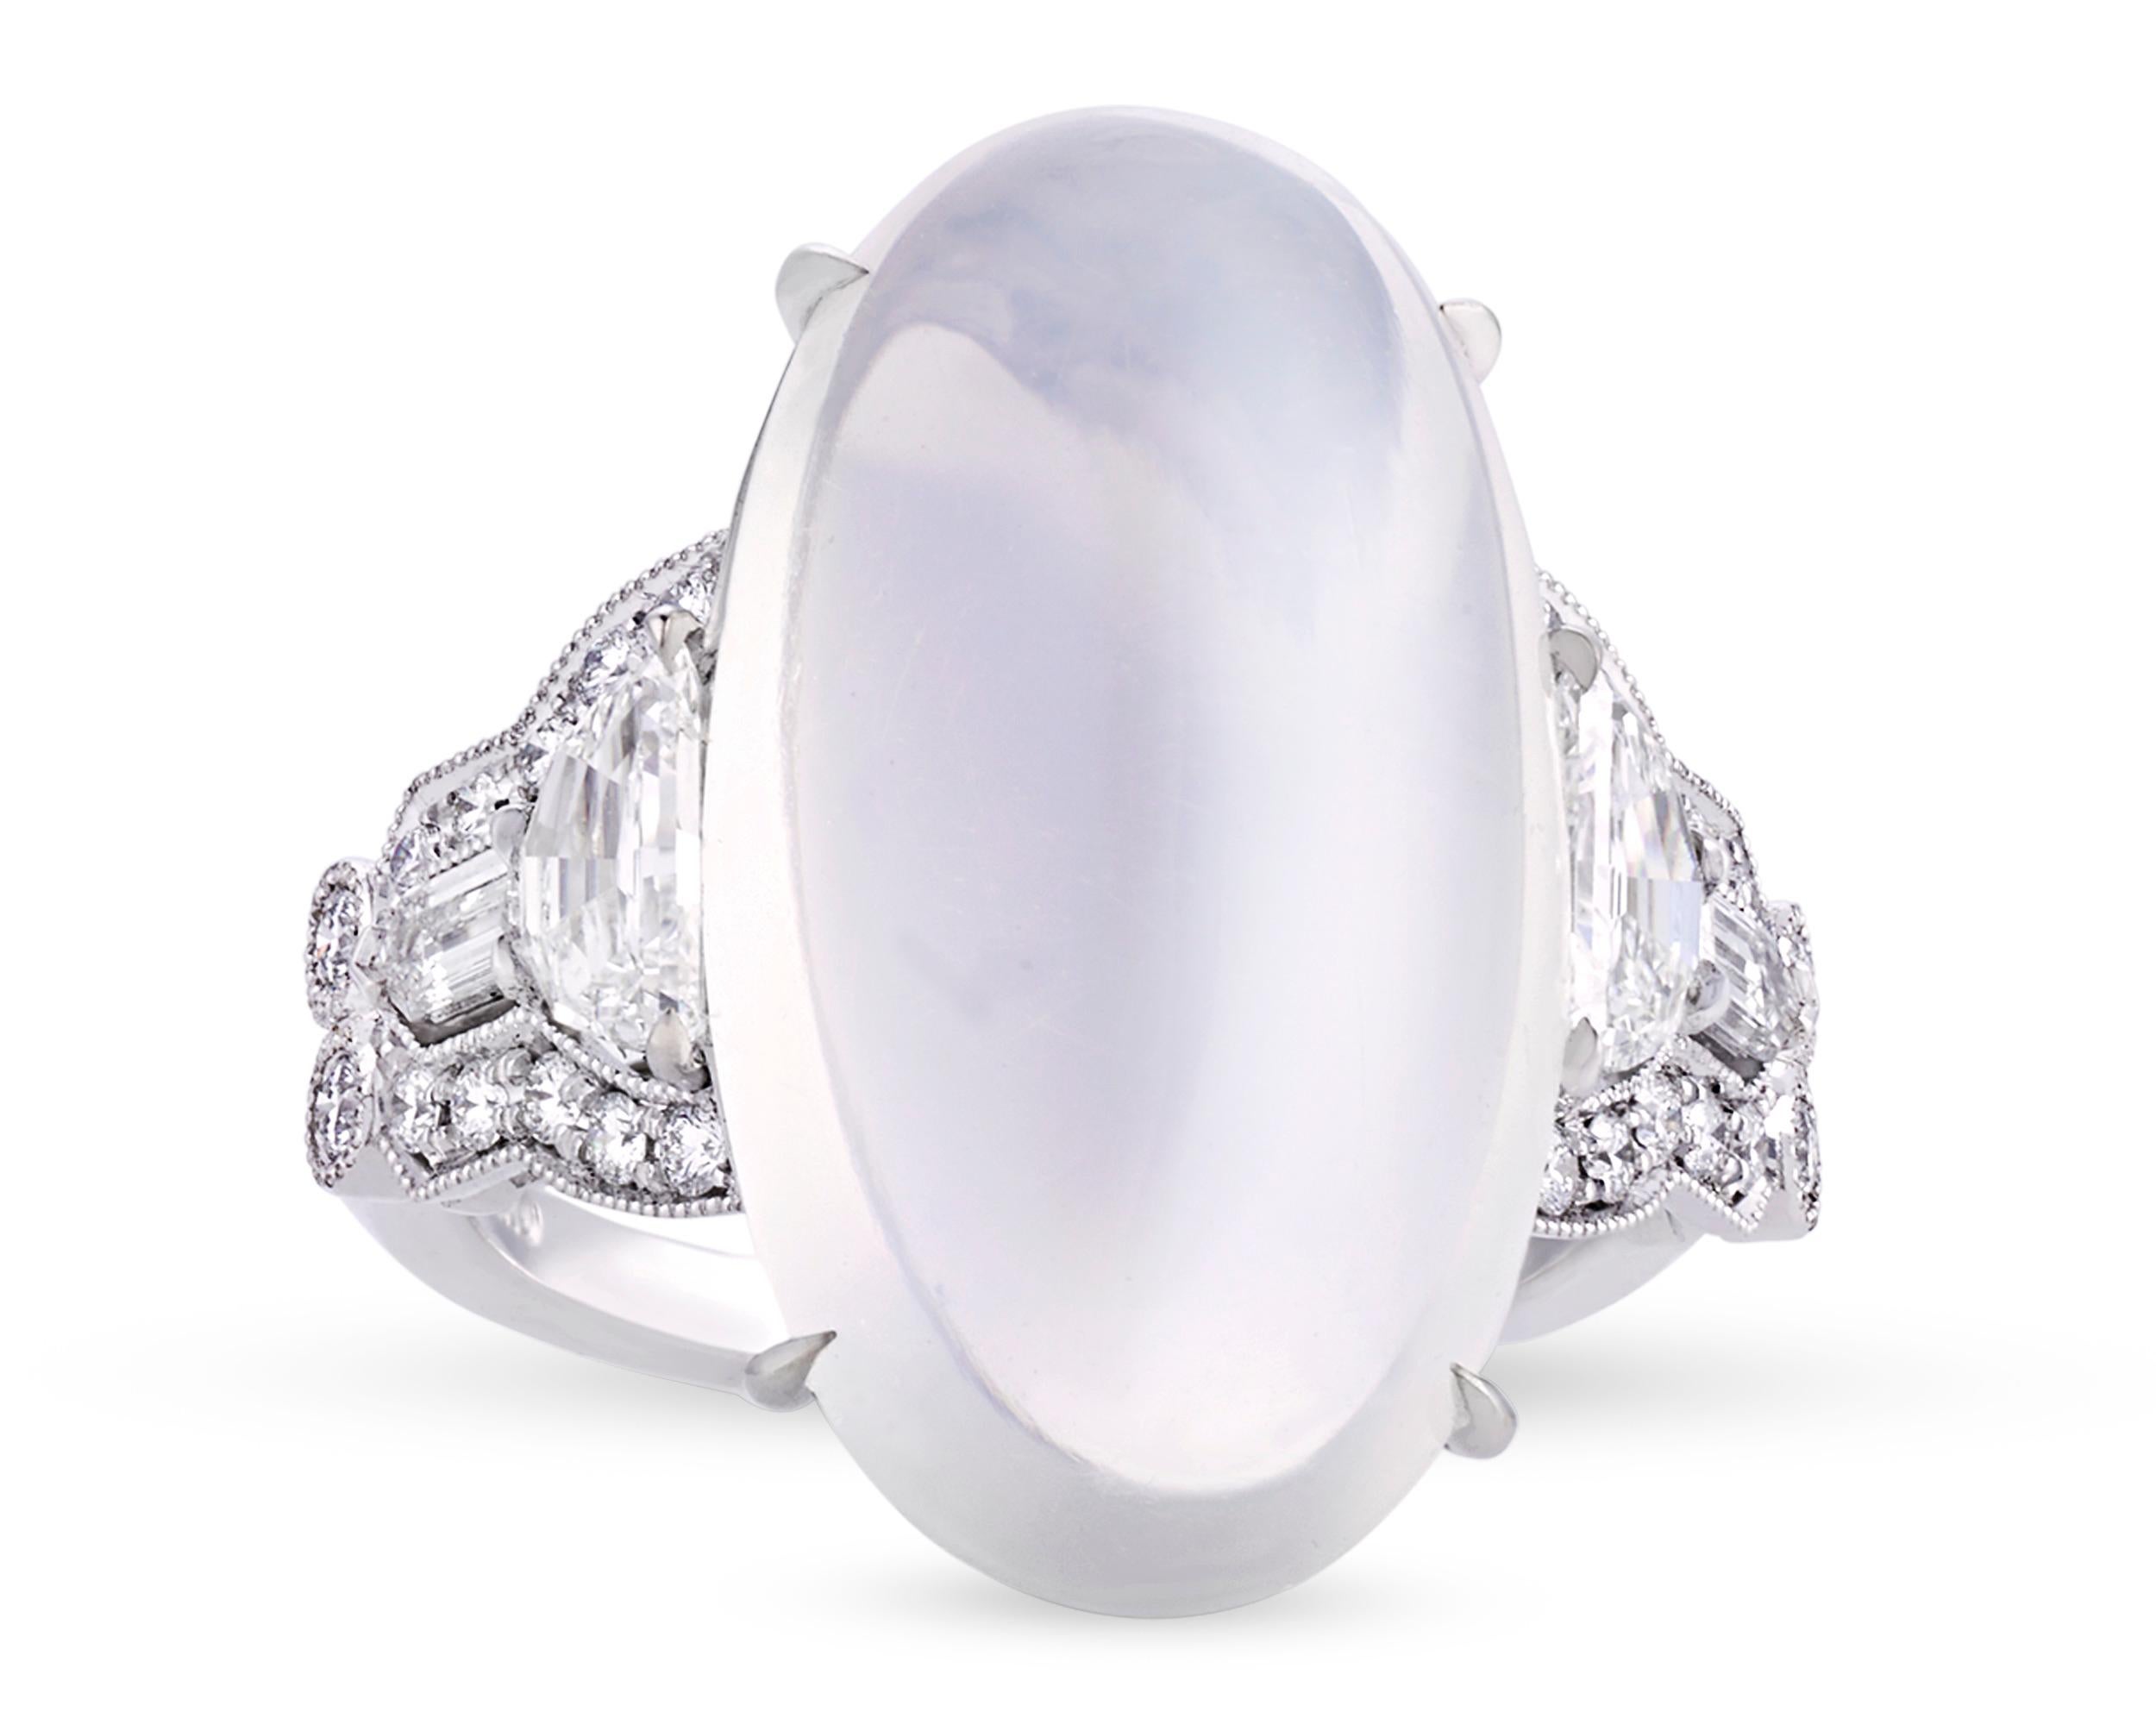 A monumental 12.46-carat oval moonstone cabochon is set in this classic Art Deco-style Raymond Yard ring. The gem displays the stunning opalescence that makes this stone so beloved, exhibiting a lovely purplish-grey hue and exceptional play of